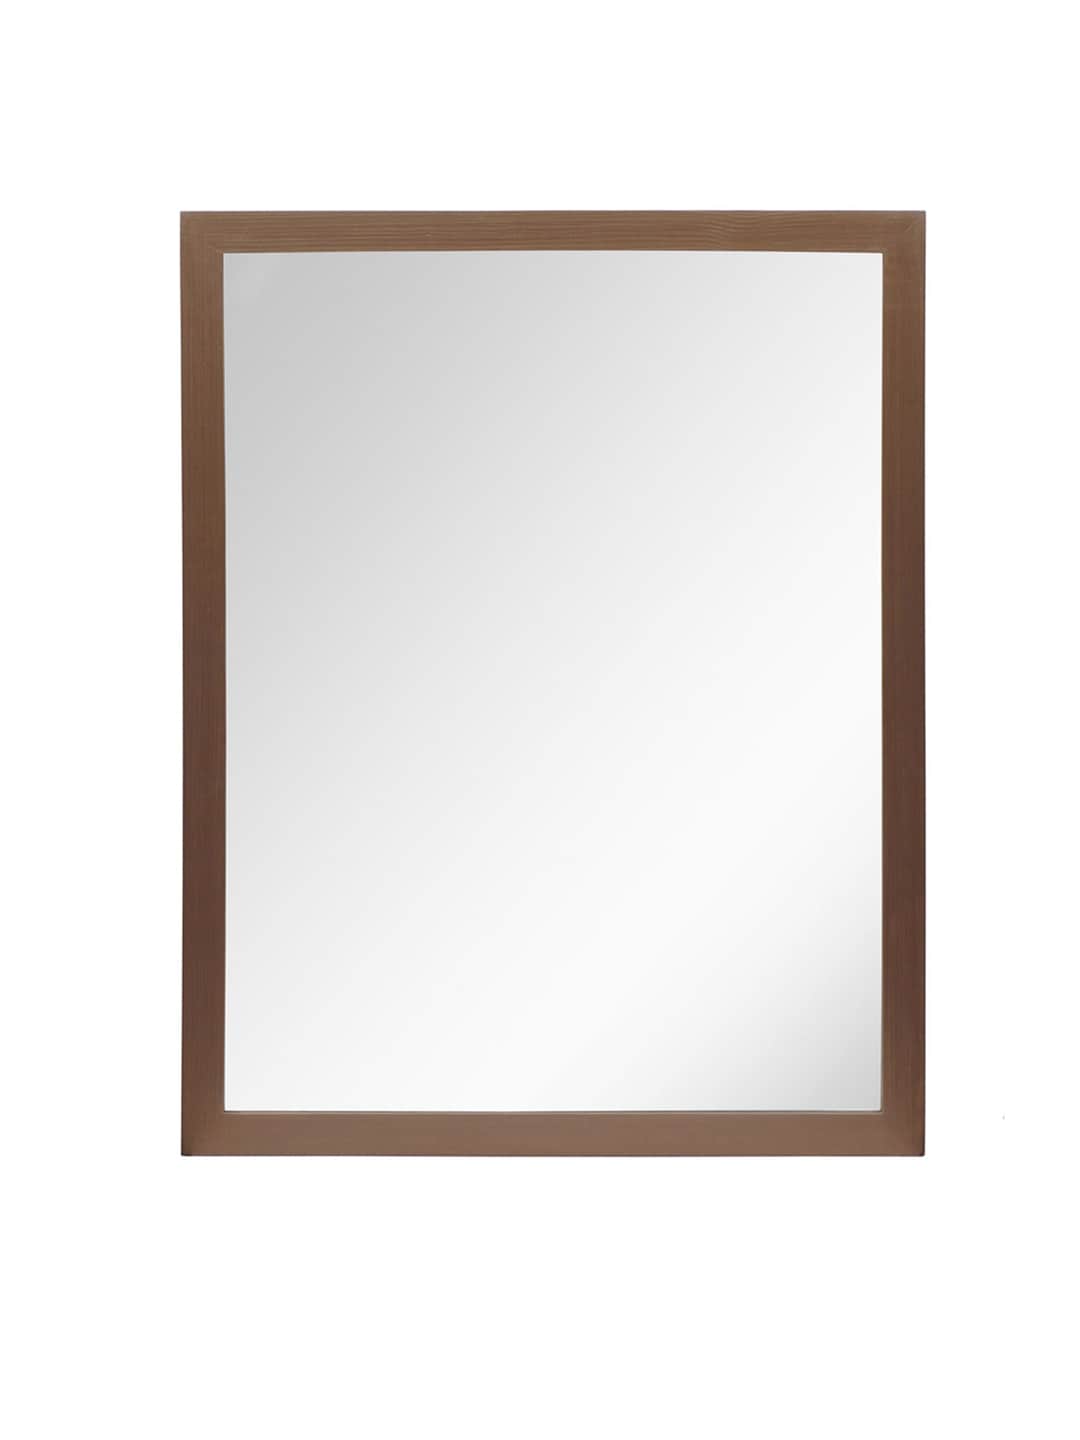 999Store Brown Wooden Wall Mirror Price in India